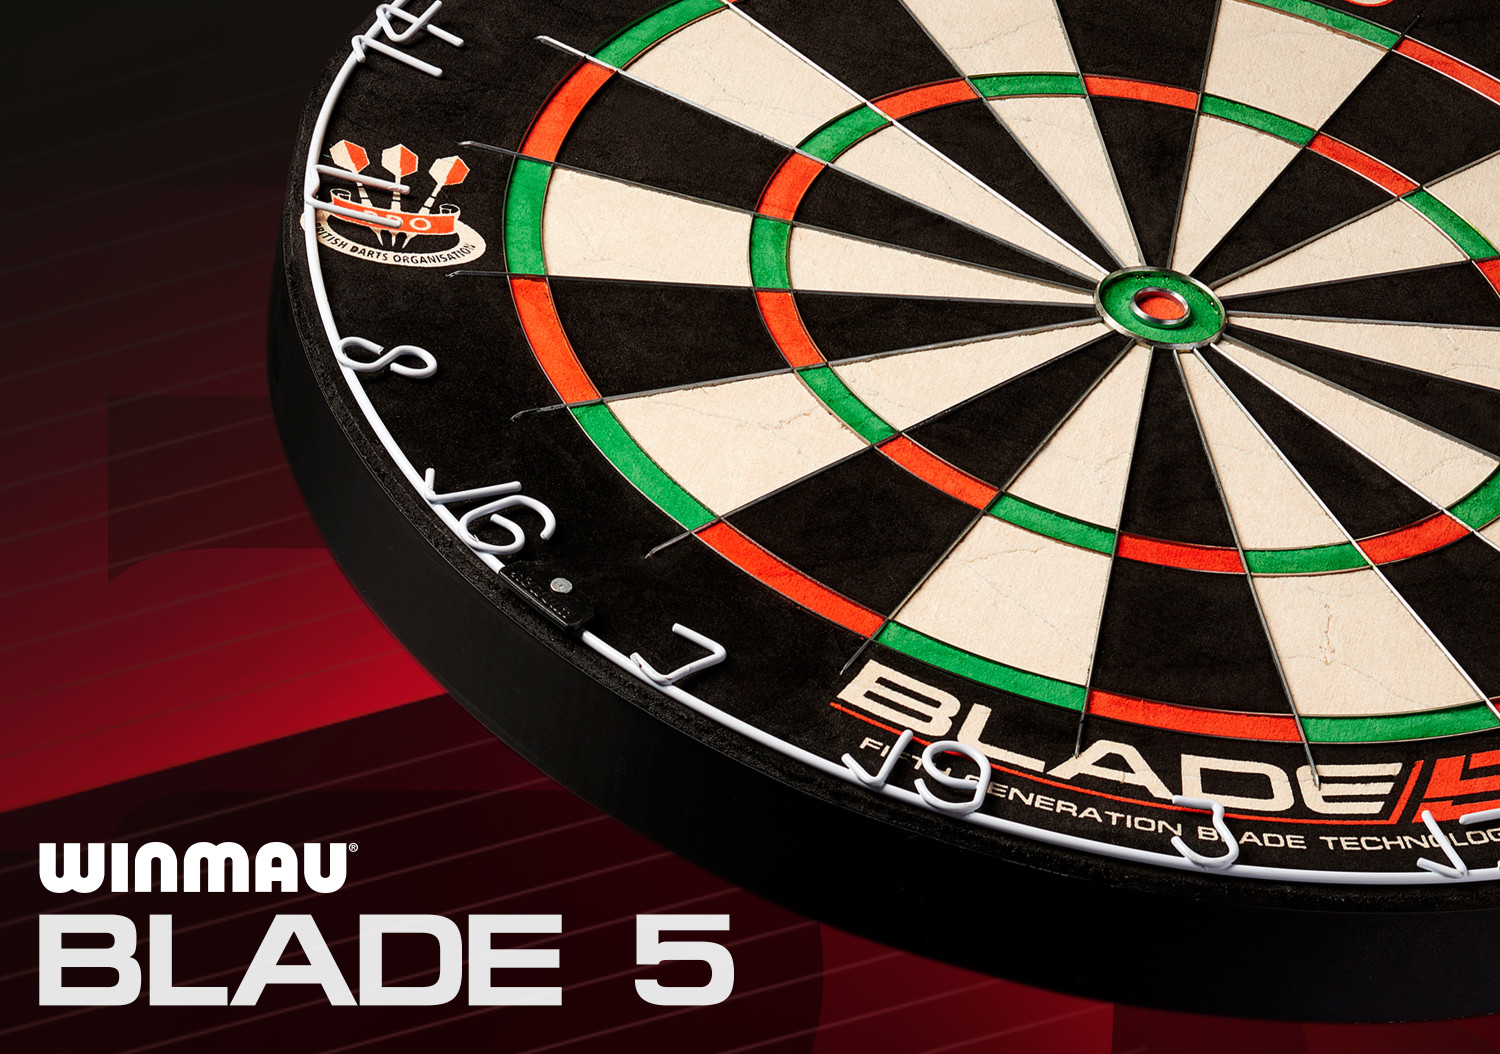 Winmau Darts Blade 5 Bristle Dartboard with All-New Thinner Wiring for Higher Scoring and Reduced Bounce-Outs - image 3 of 10